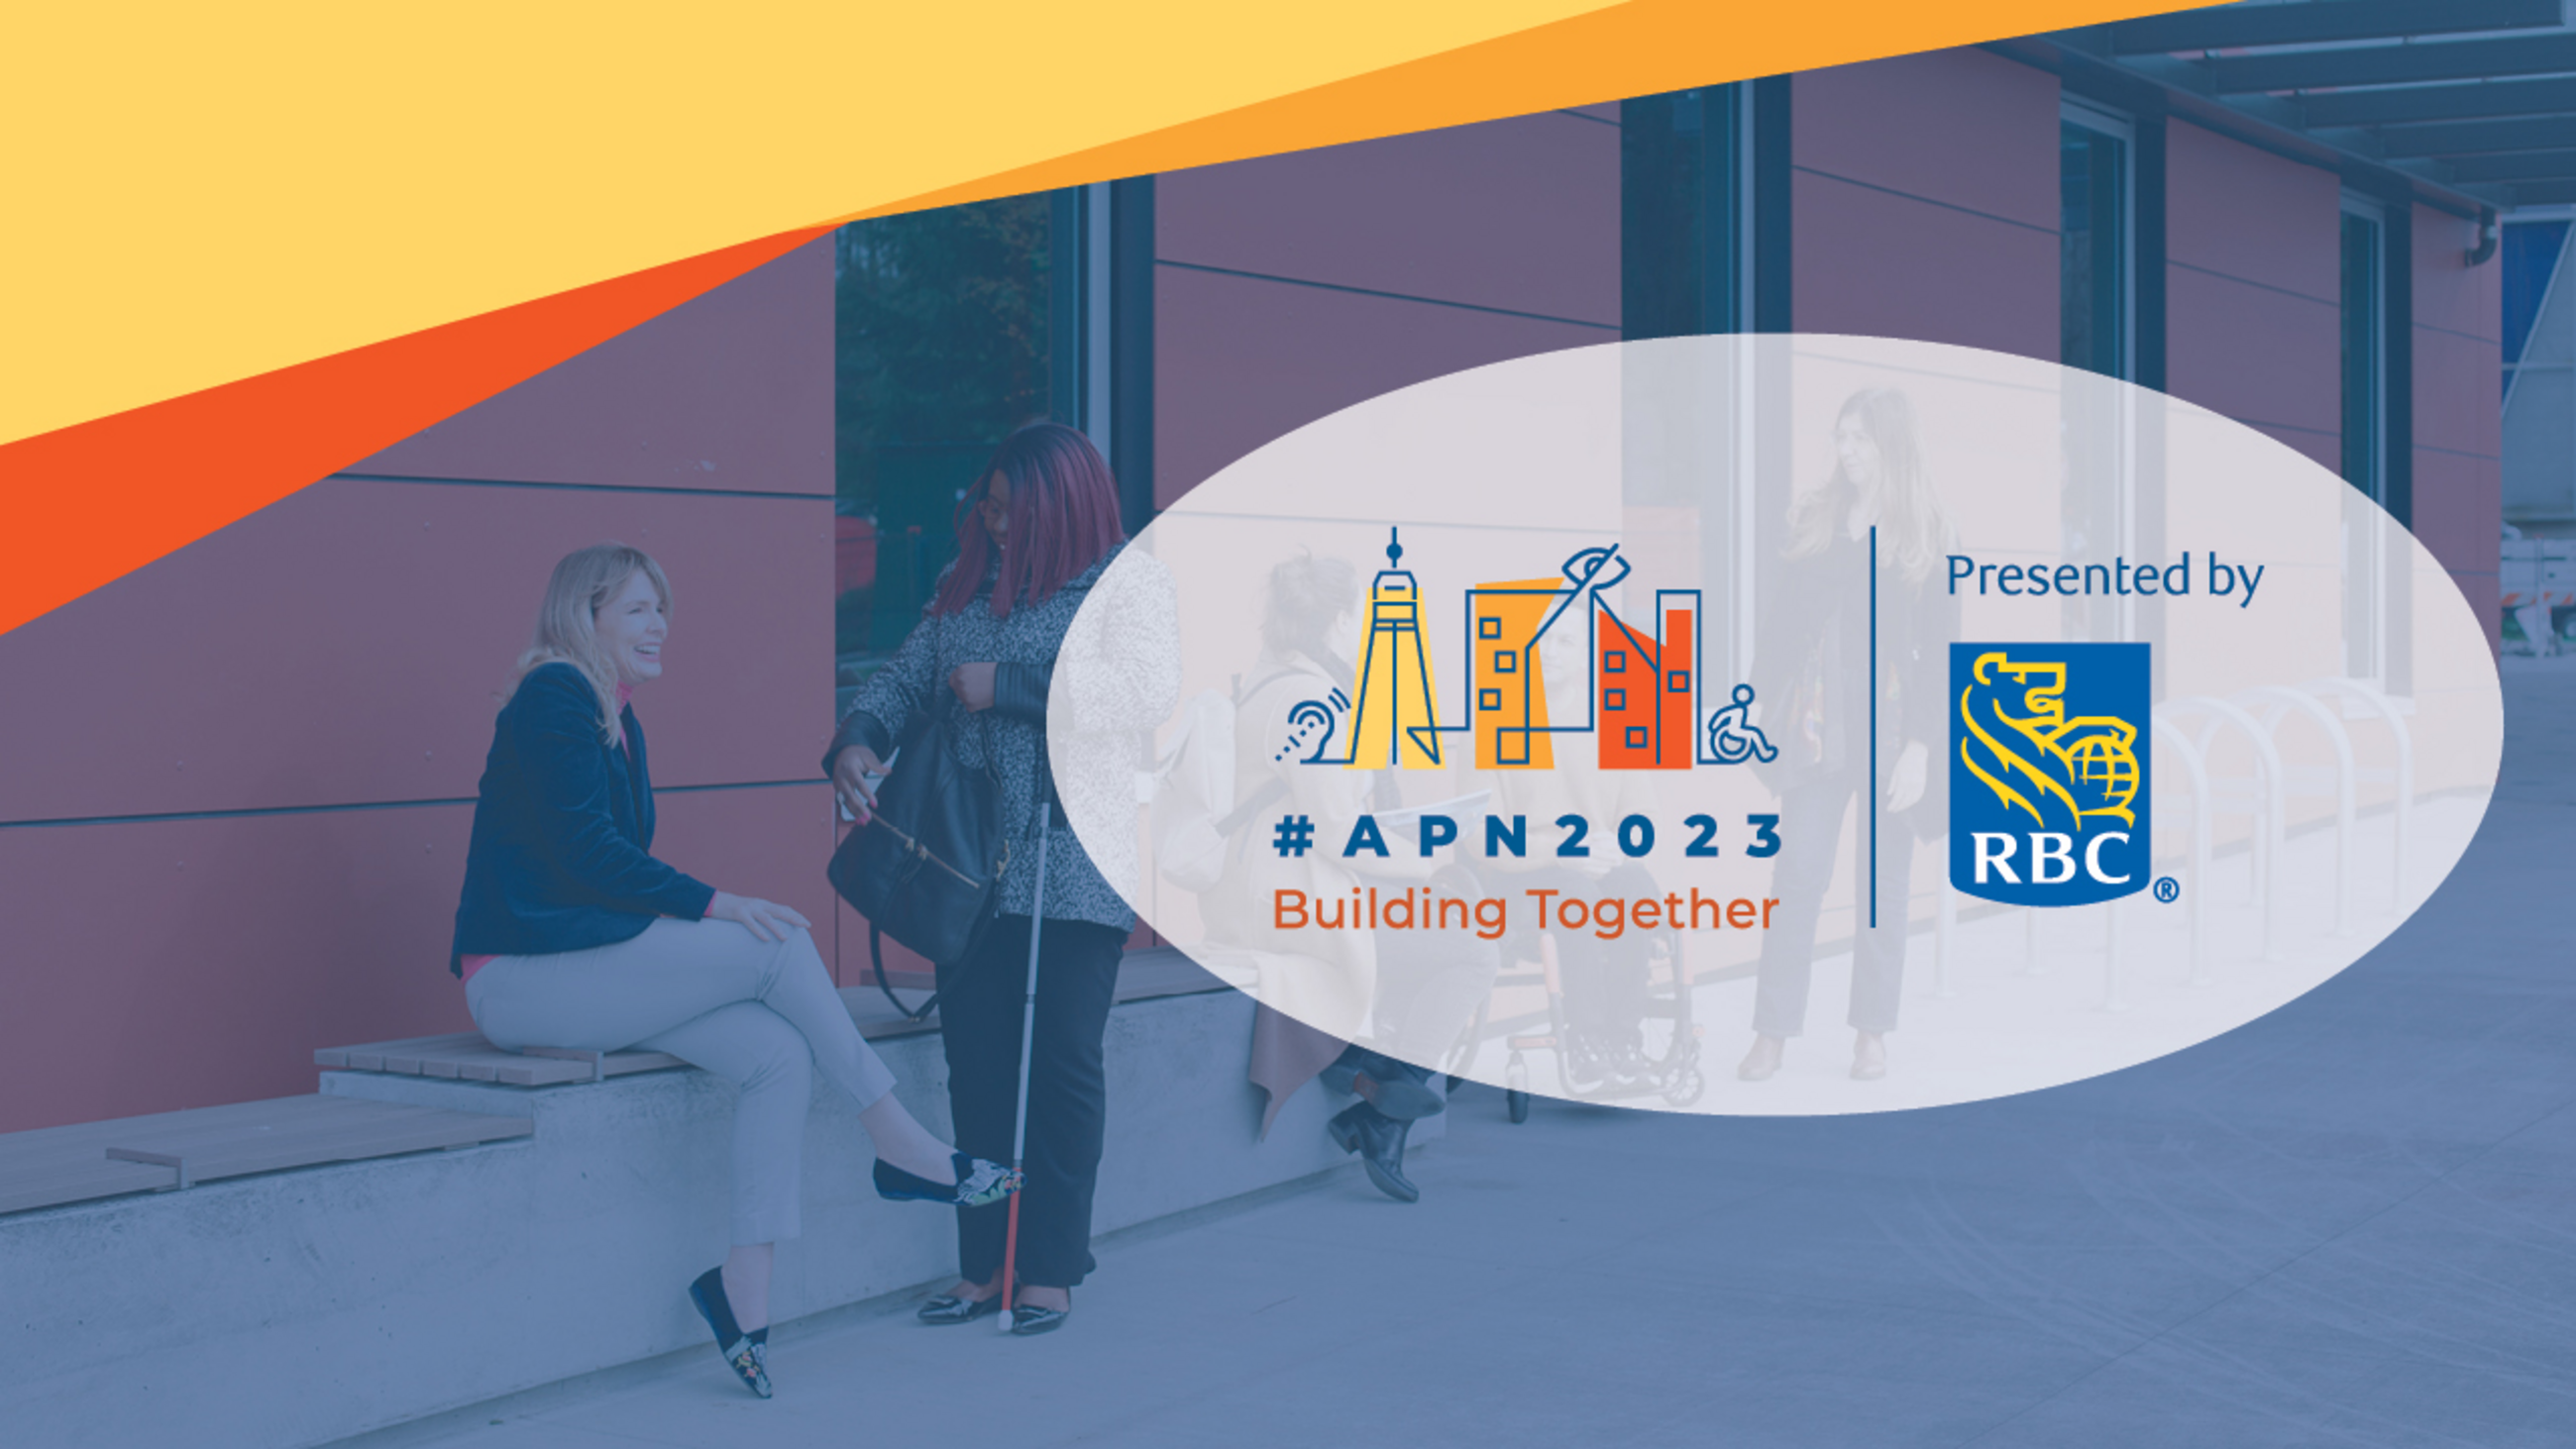 #APN2023 Building Together Presented by RBC. In the background there are people of different abilities talking and laughing in front of a building.